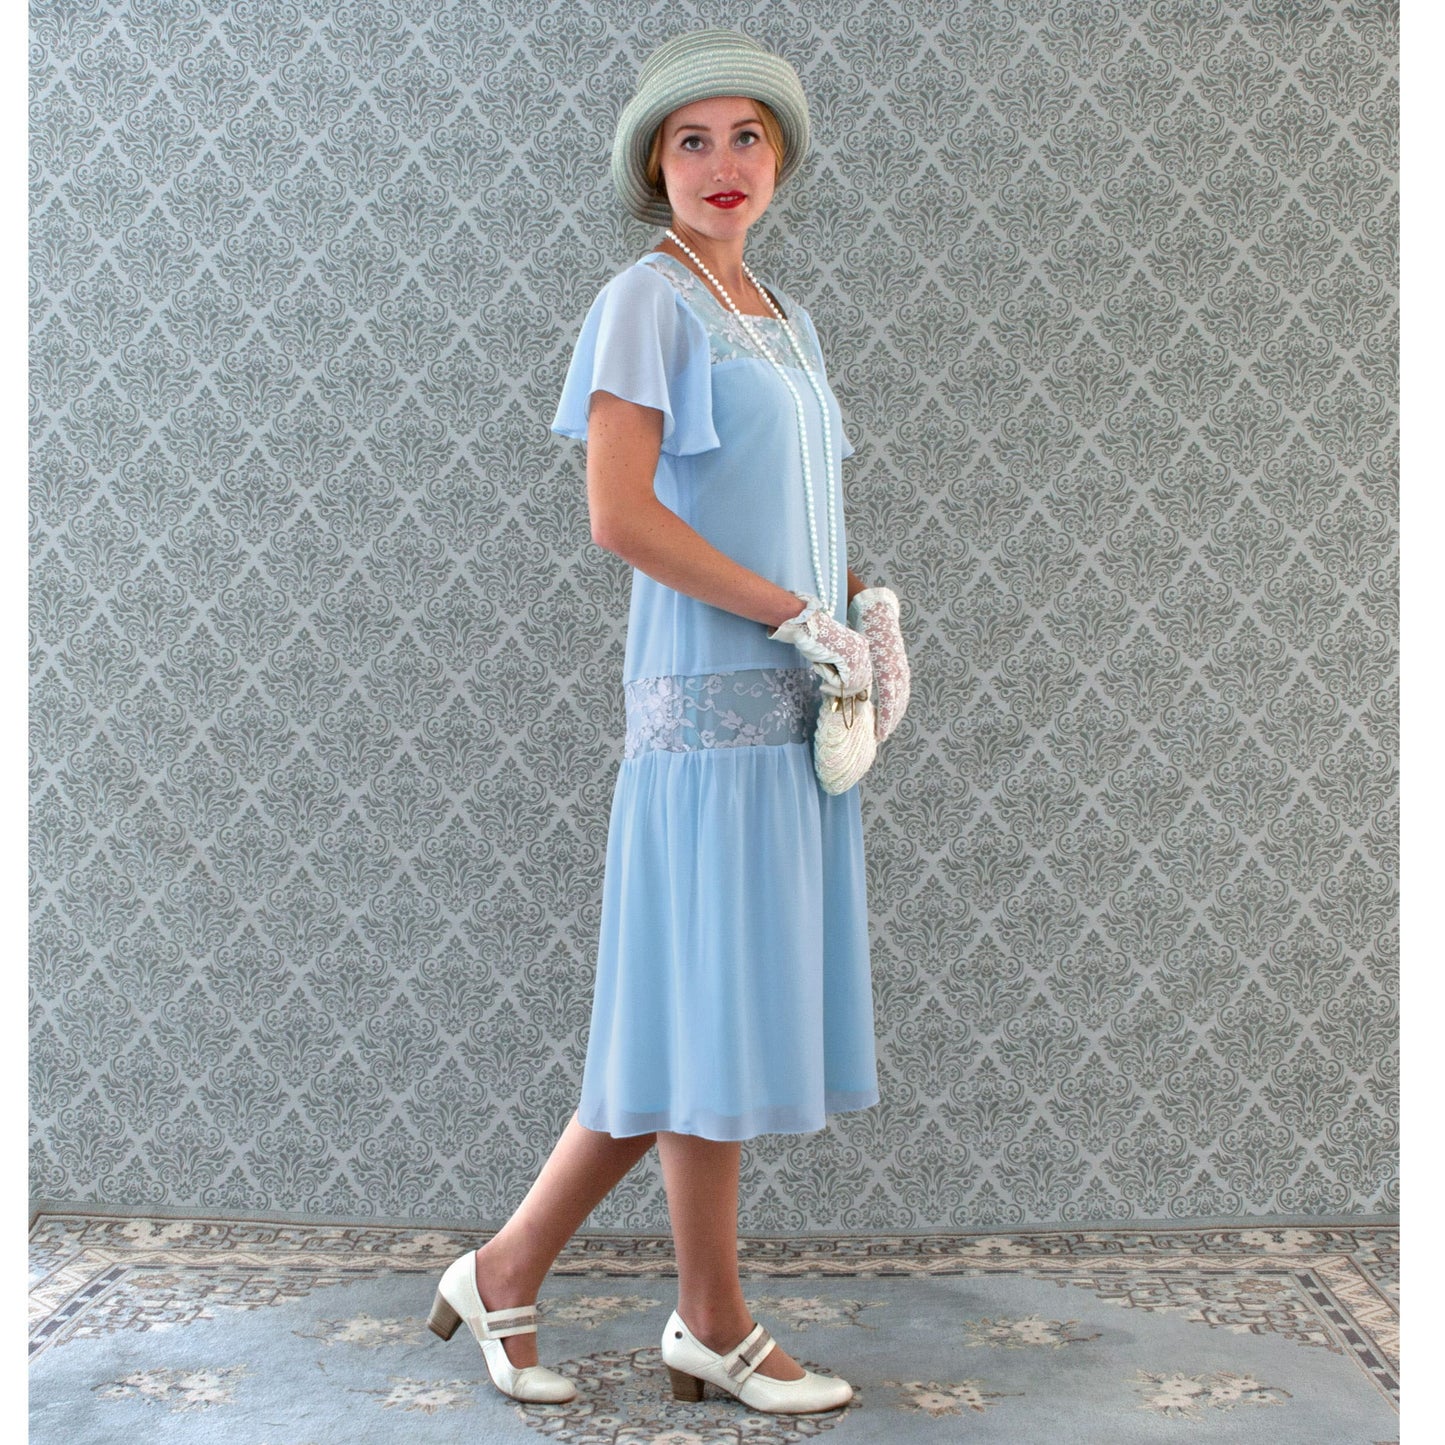 Light blue 1920s Great Gatsby dress with flutter sleeves - a vintage-inspired Roaring Twenties dress